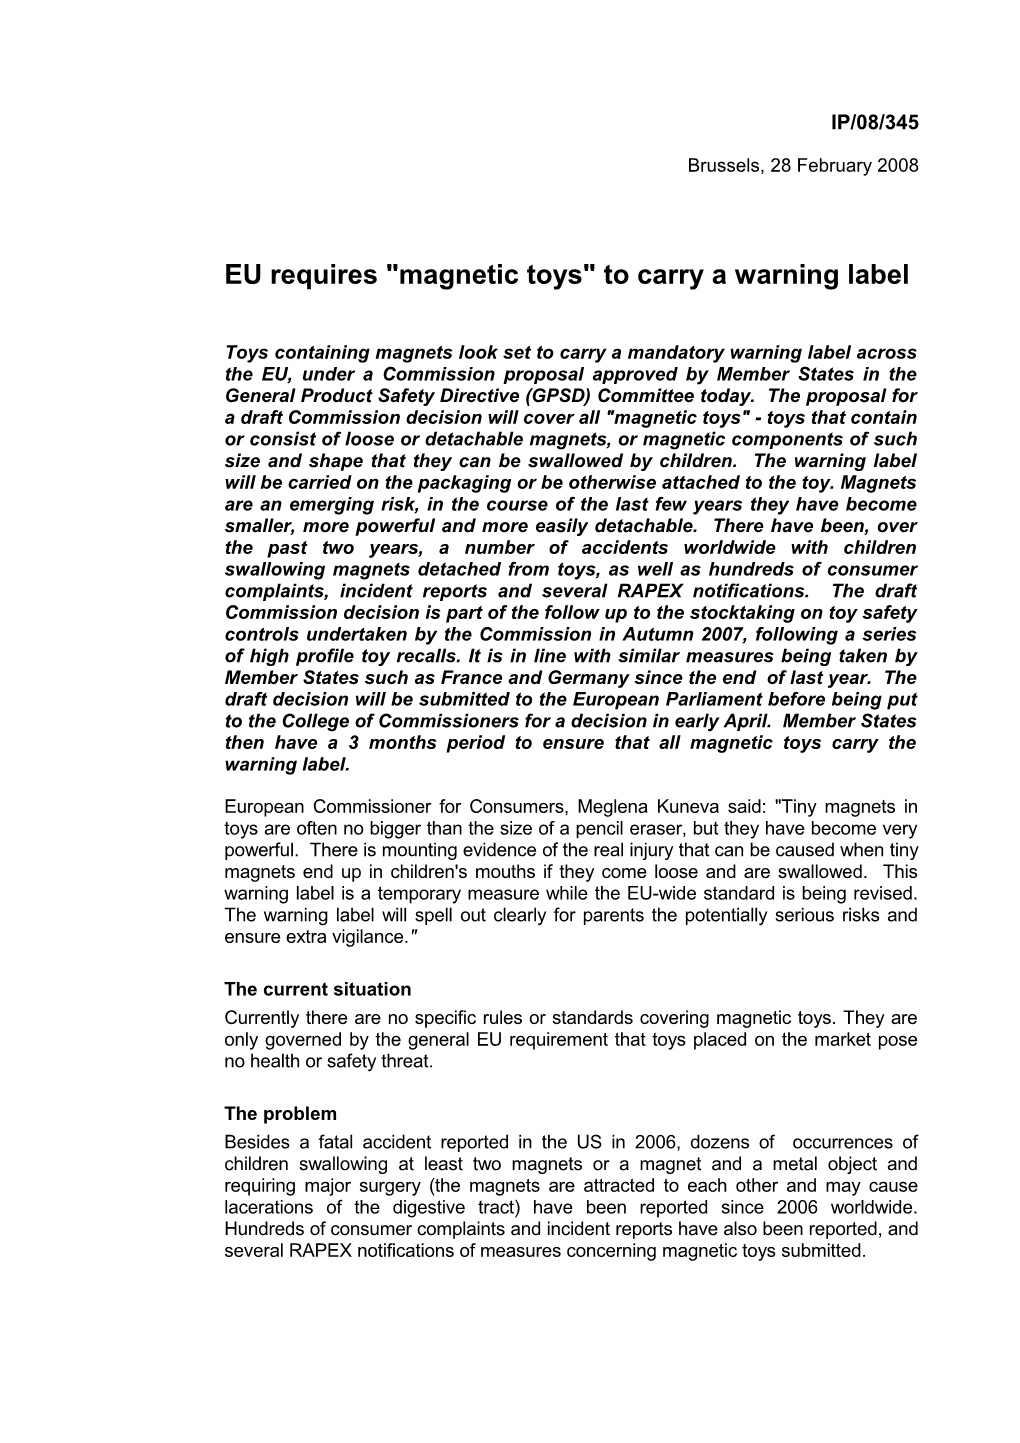 EU Requires Magnetic Toys to Carry a Warning Label